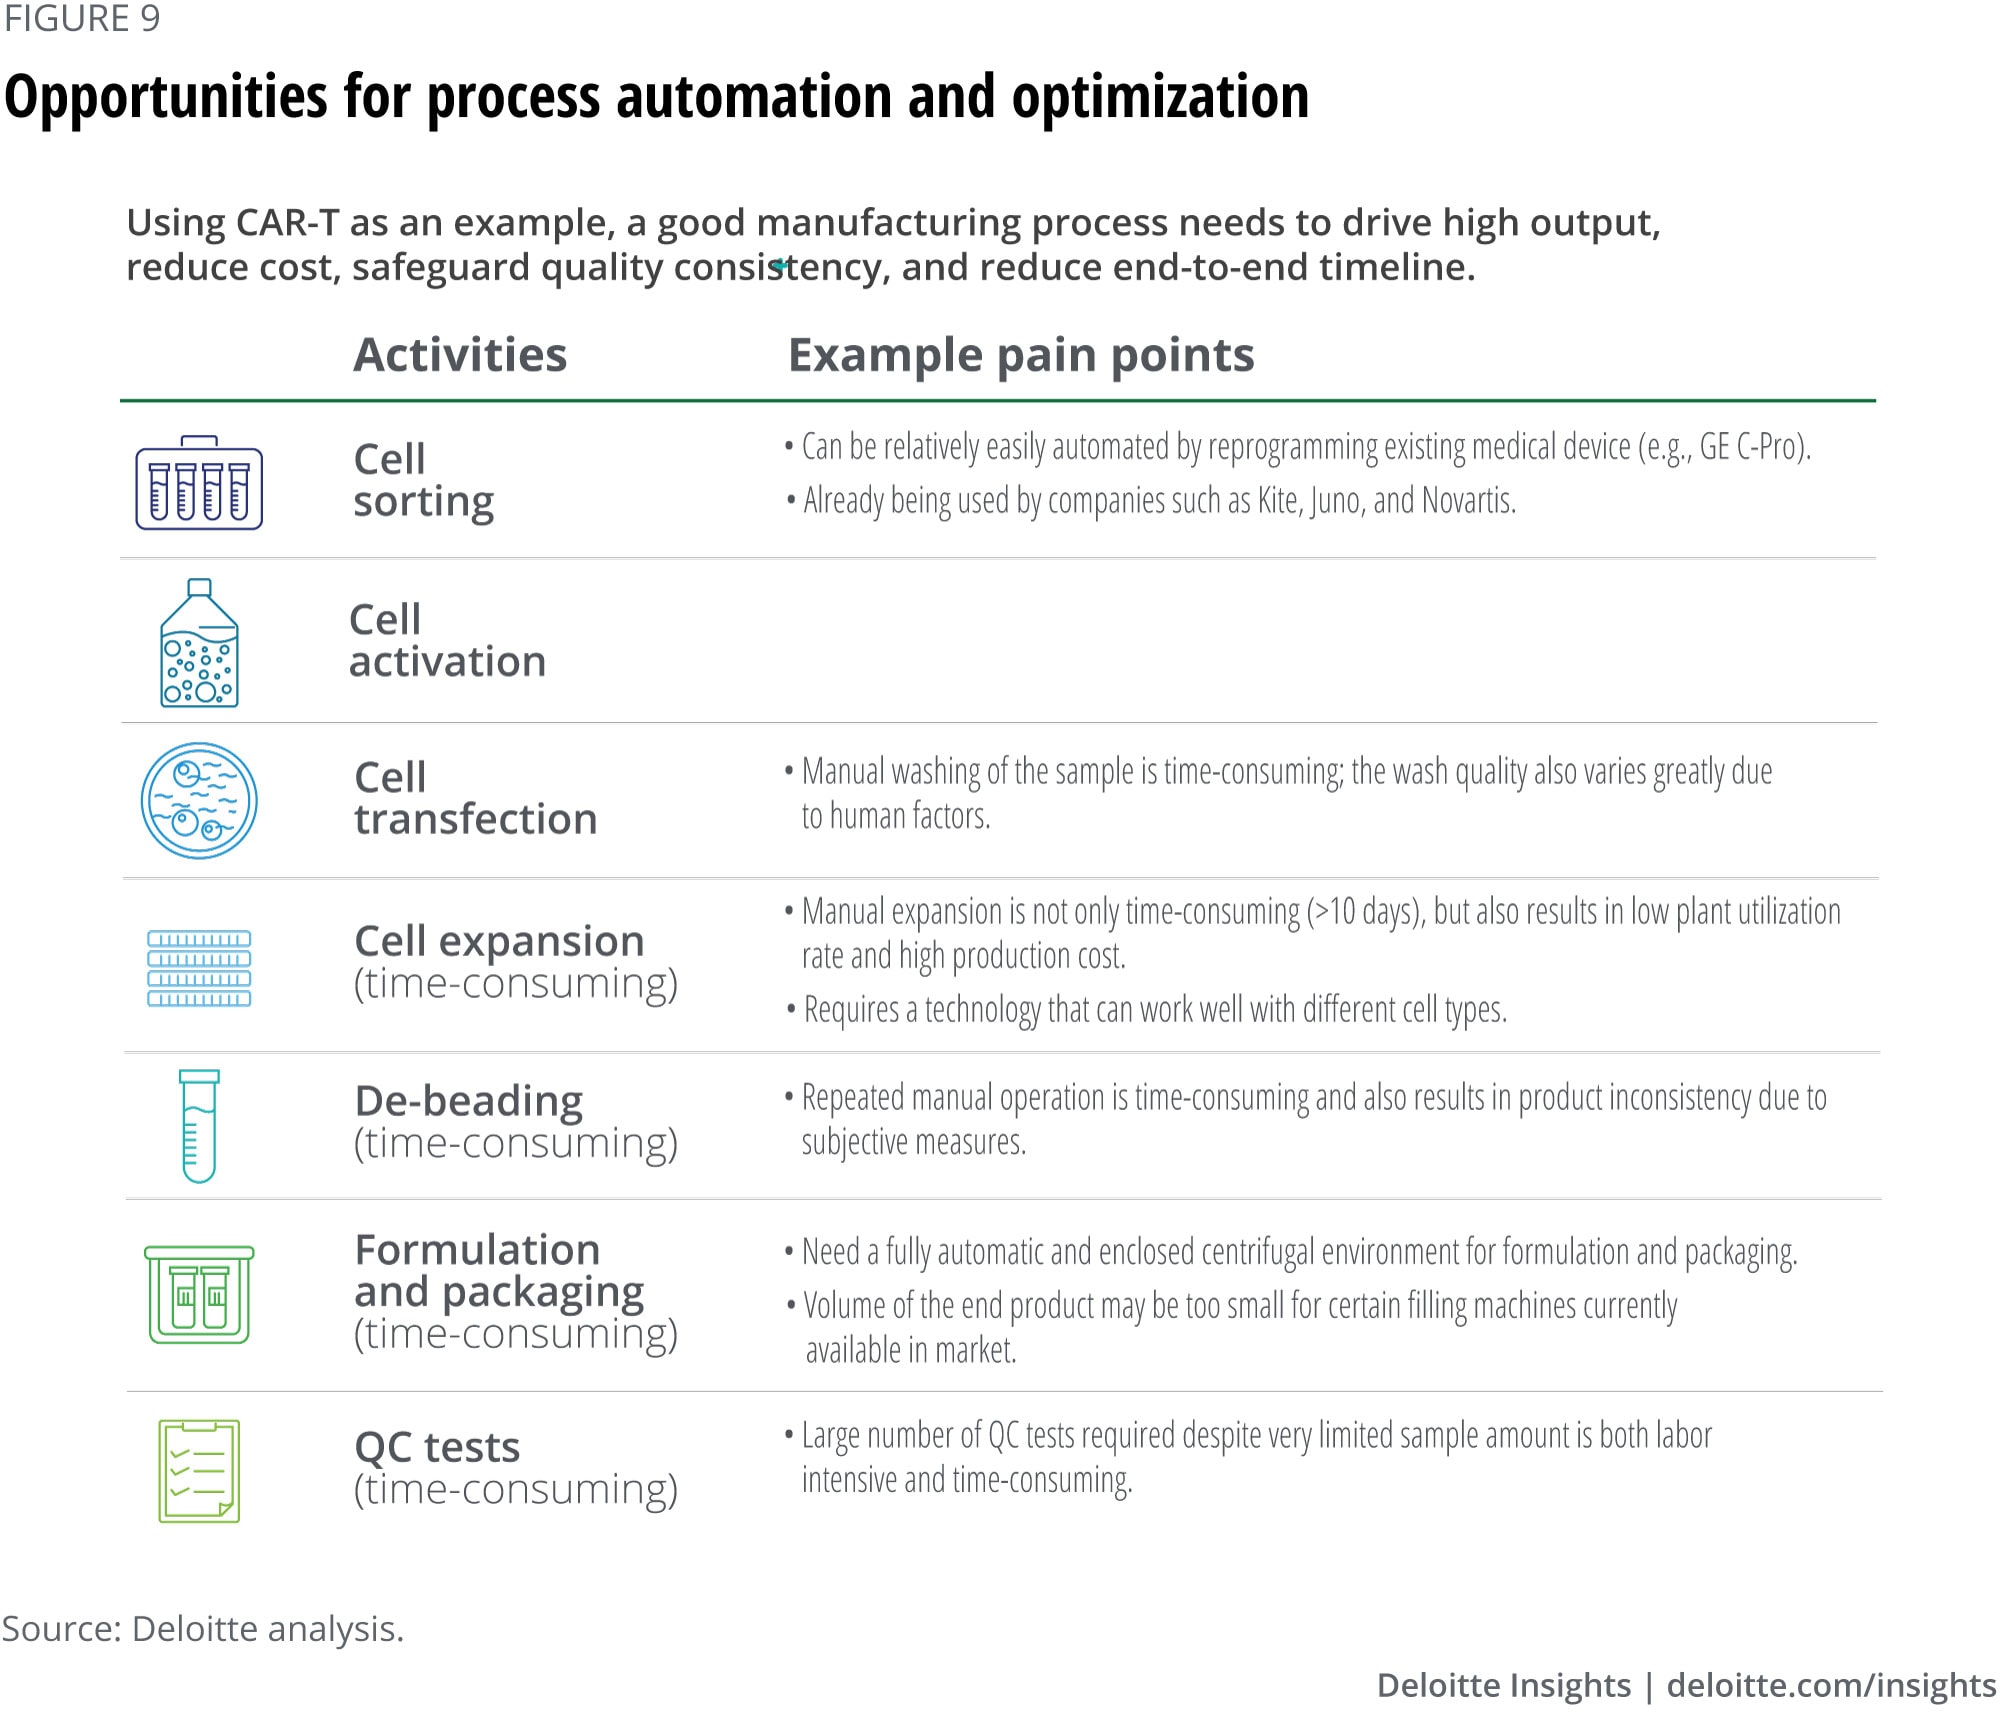 Opportunities for CAR-T process automation and optimization